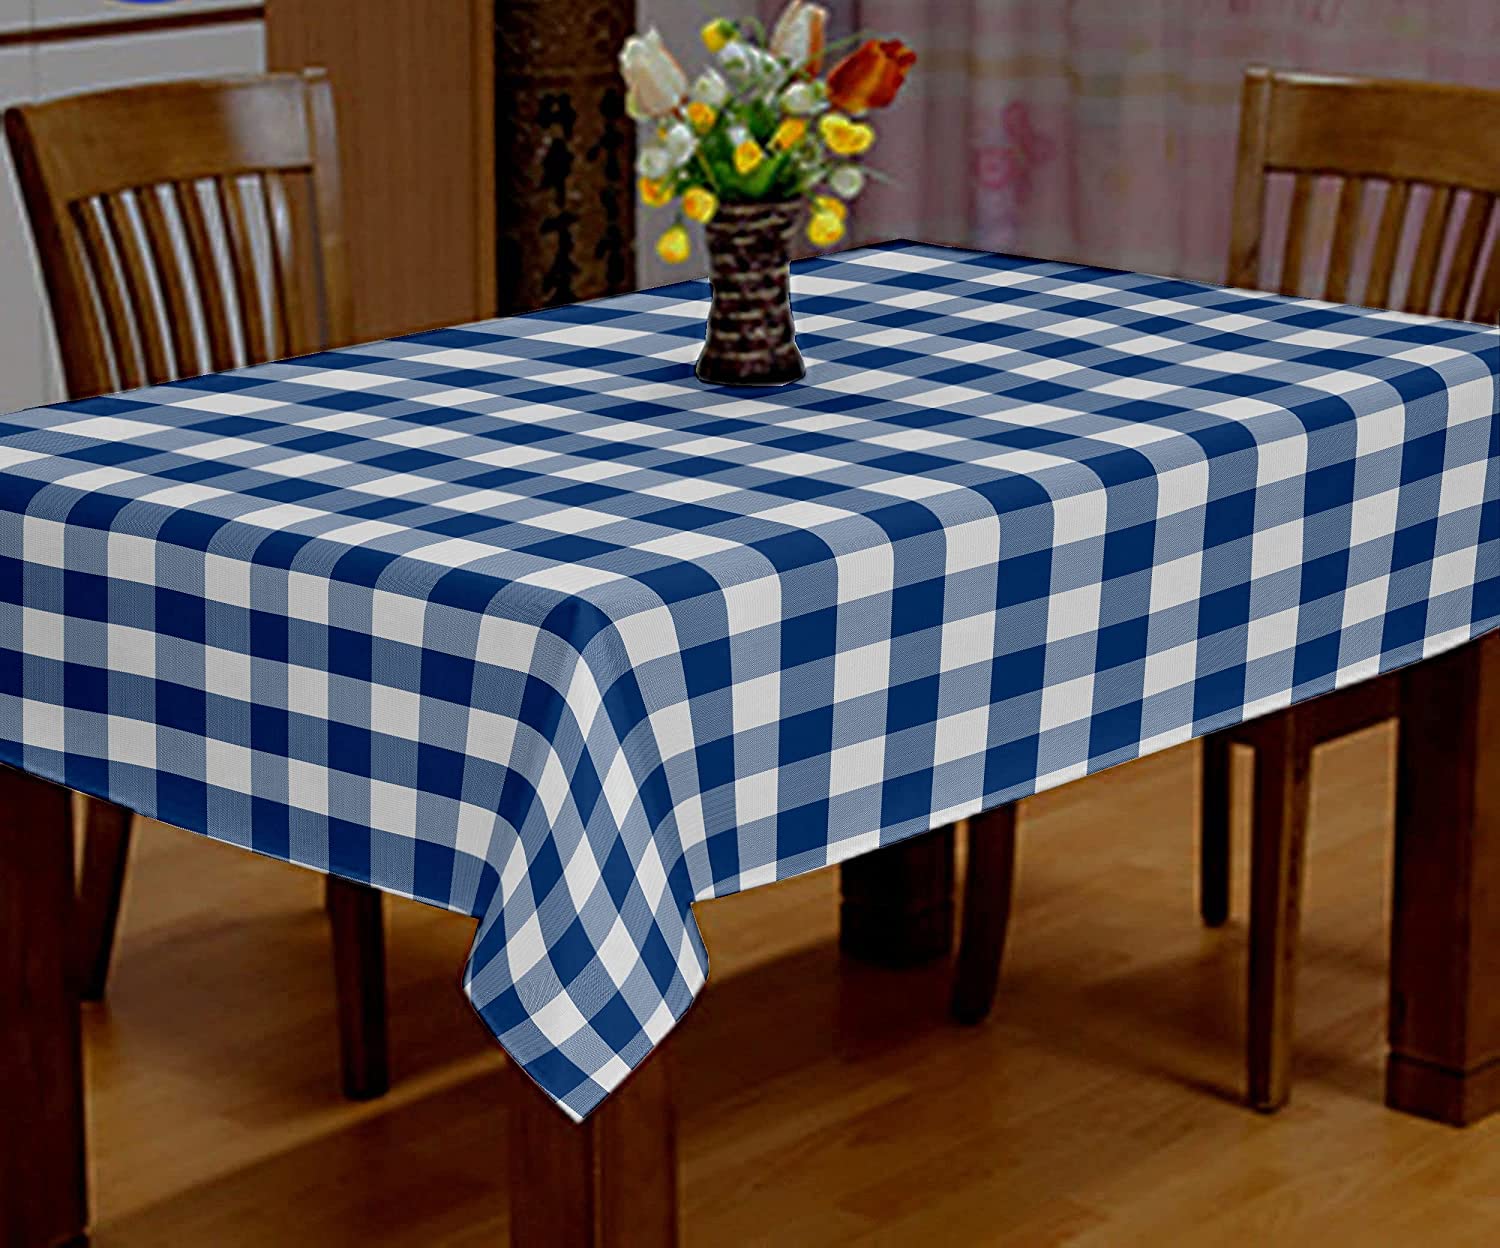 Lushomes Buffalo Checks Blue Plaid Square Dining Table Cover Cloth (Size 60 x 60”, 4 Seater Square Table Cloth)